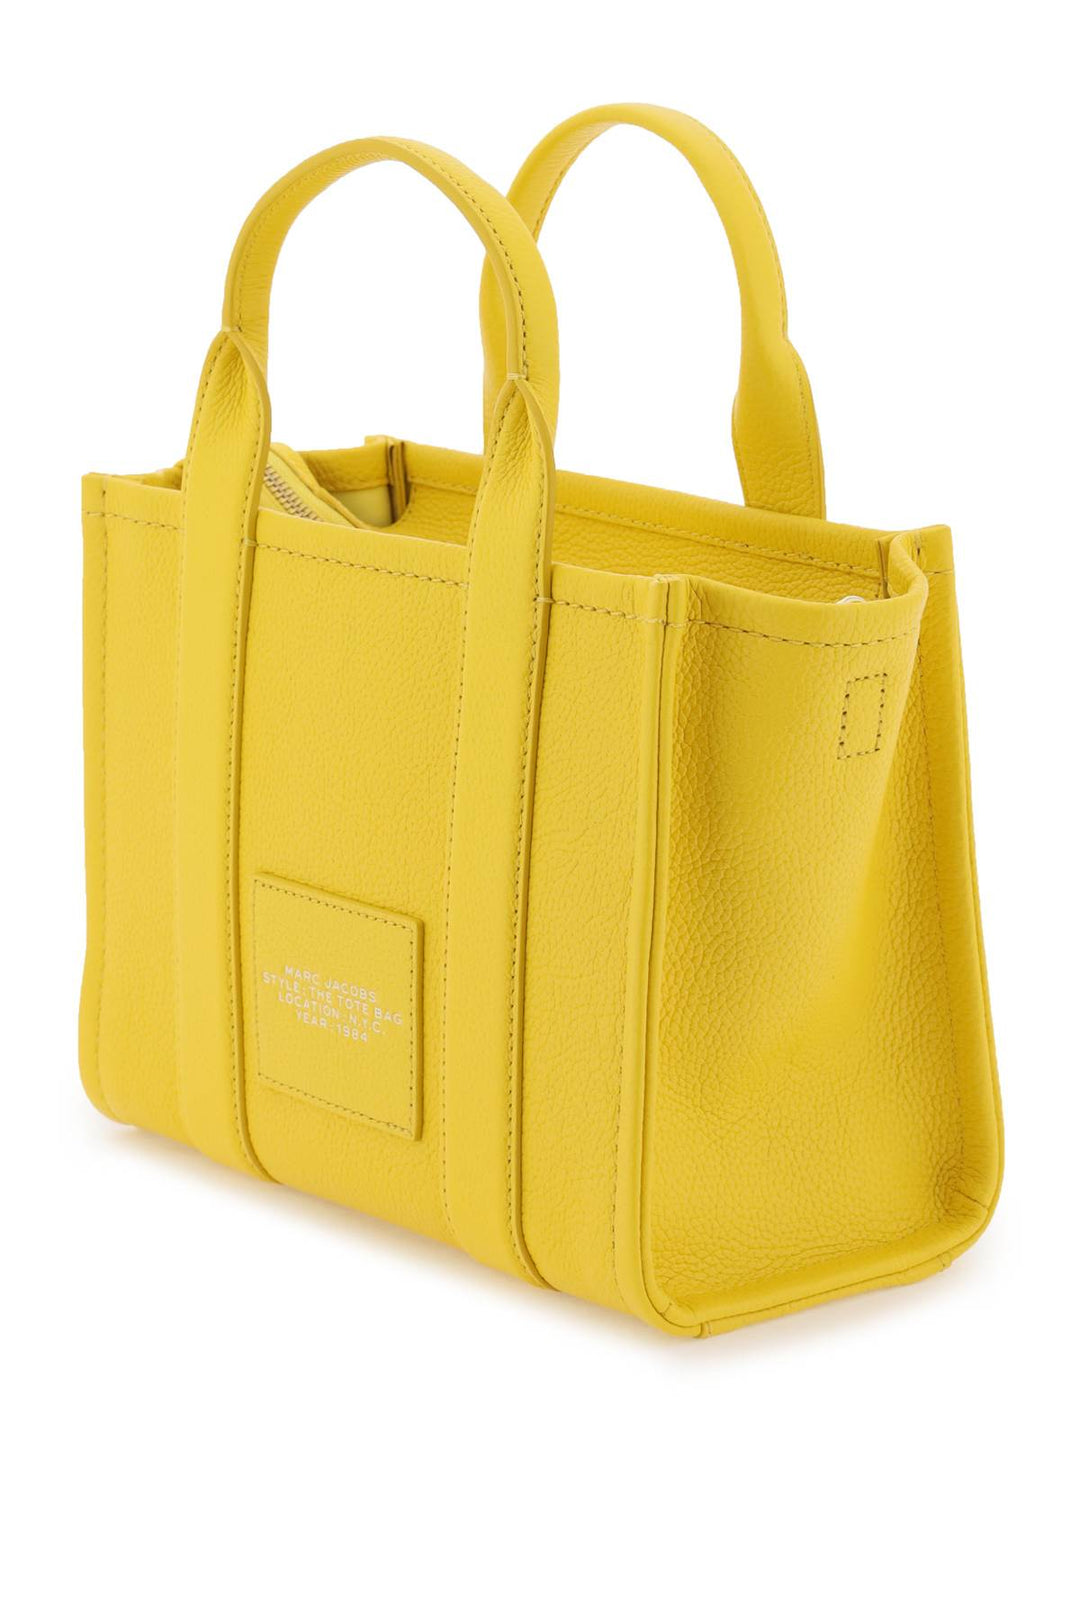 Borsa 'The Leather Small Tote Bag' - Marc Jacobs - Donna